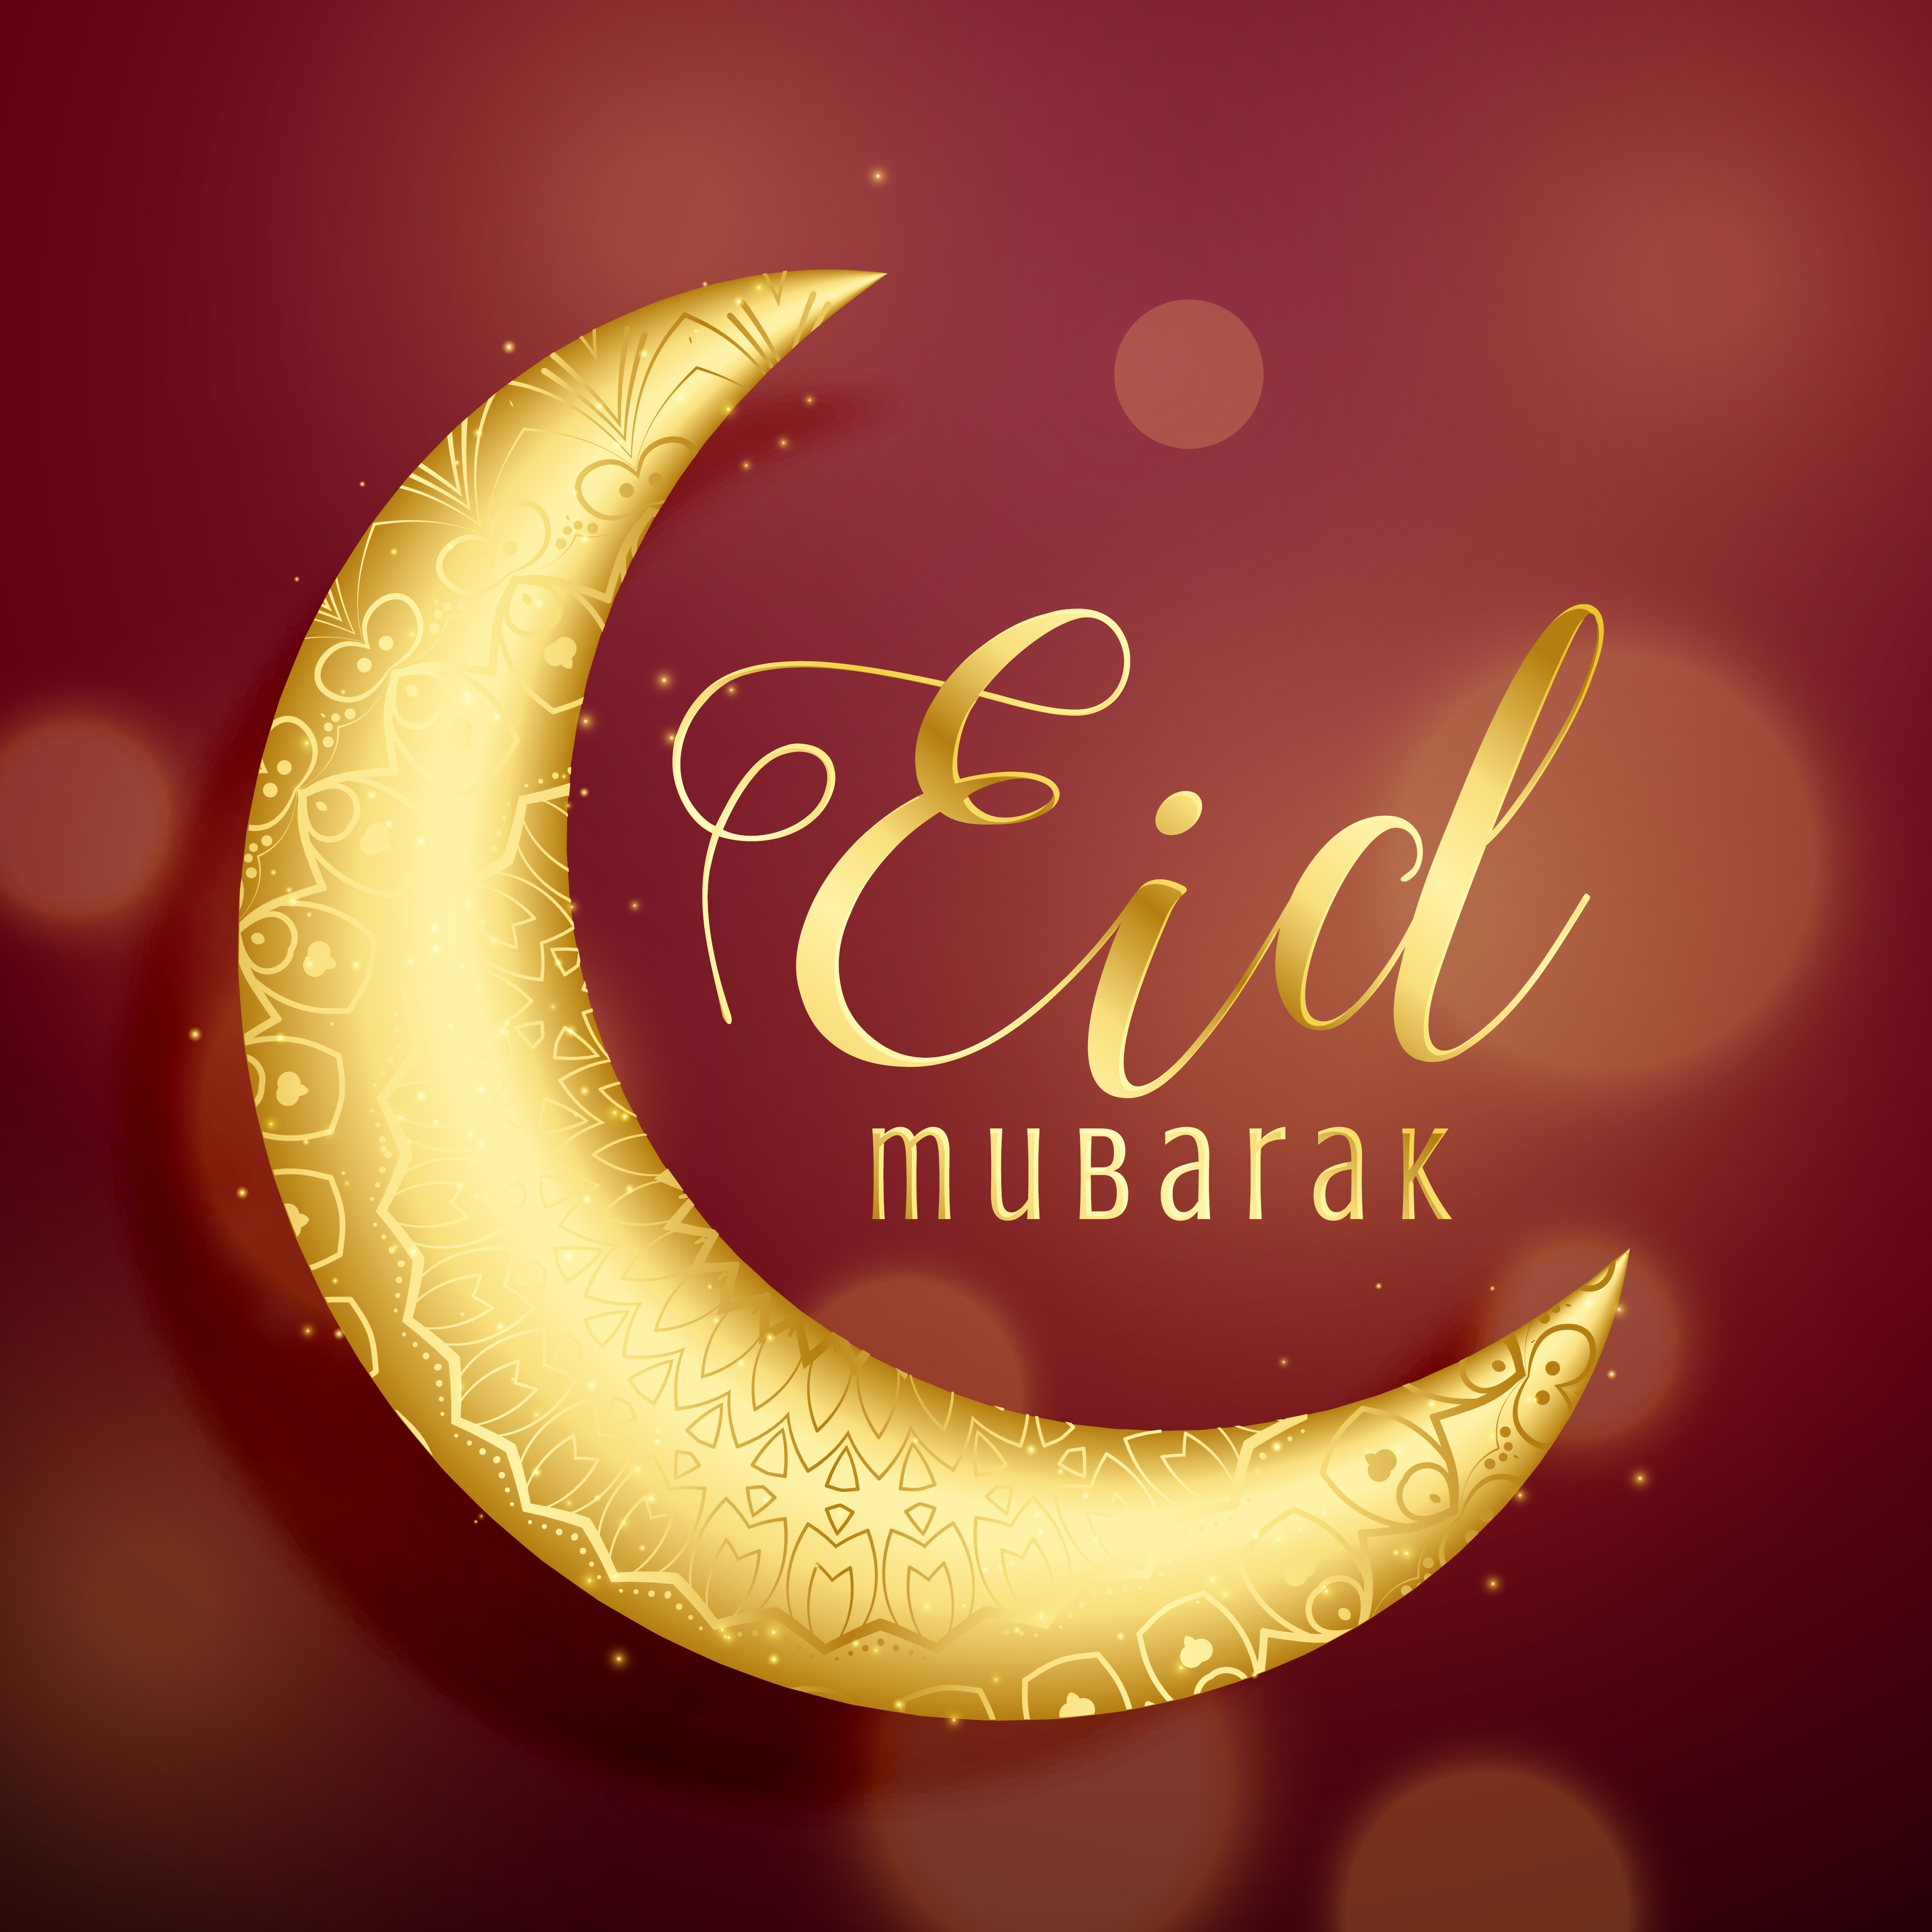 Golden crescent moon on red background for eid festival 